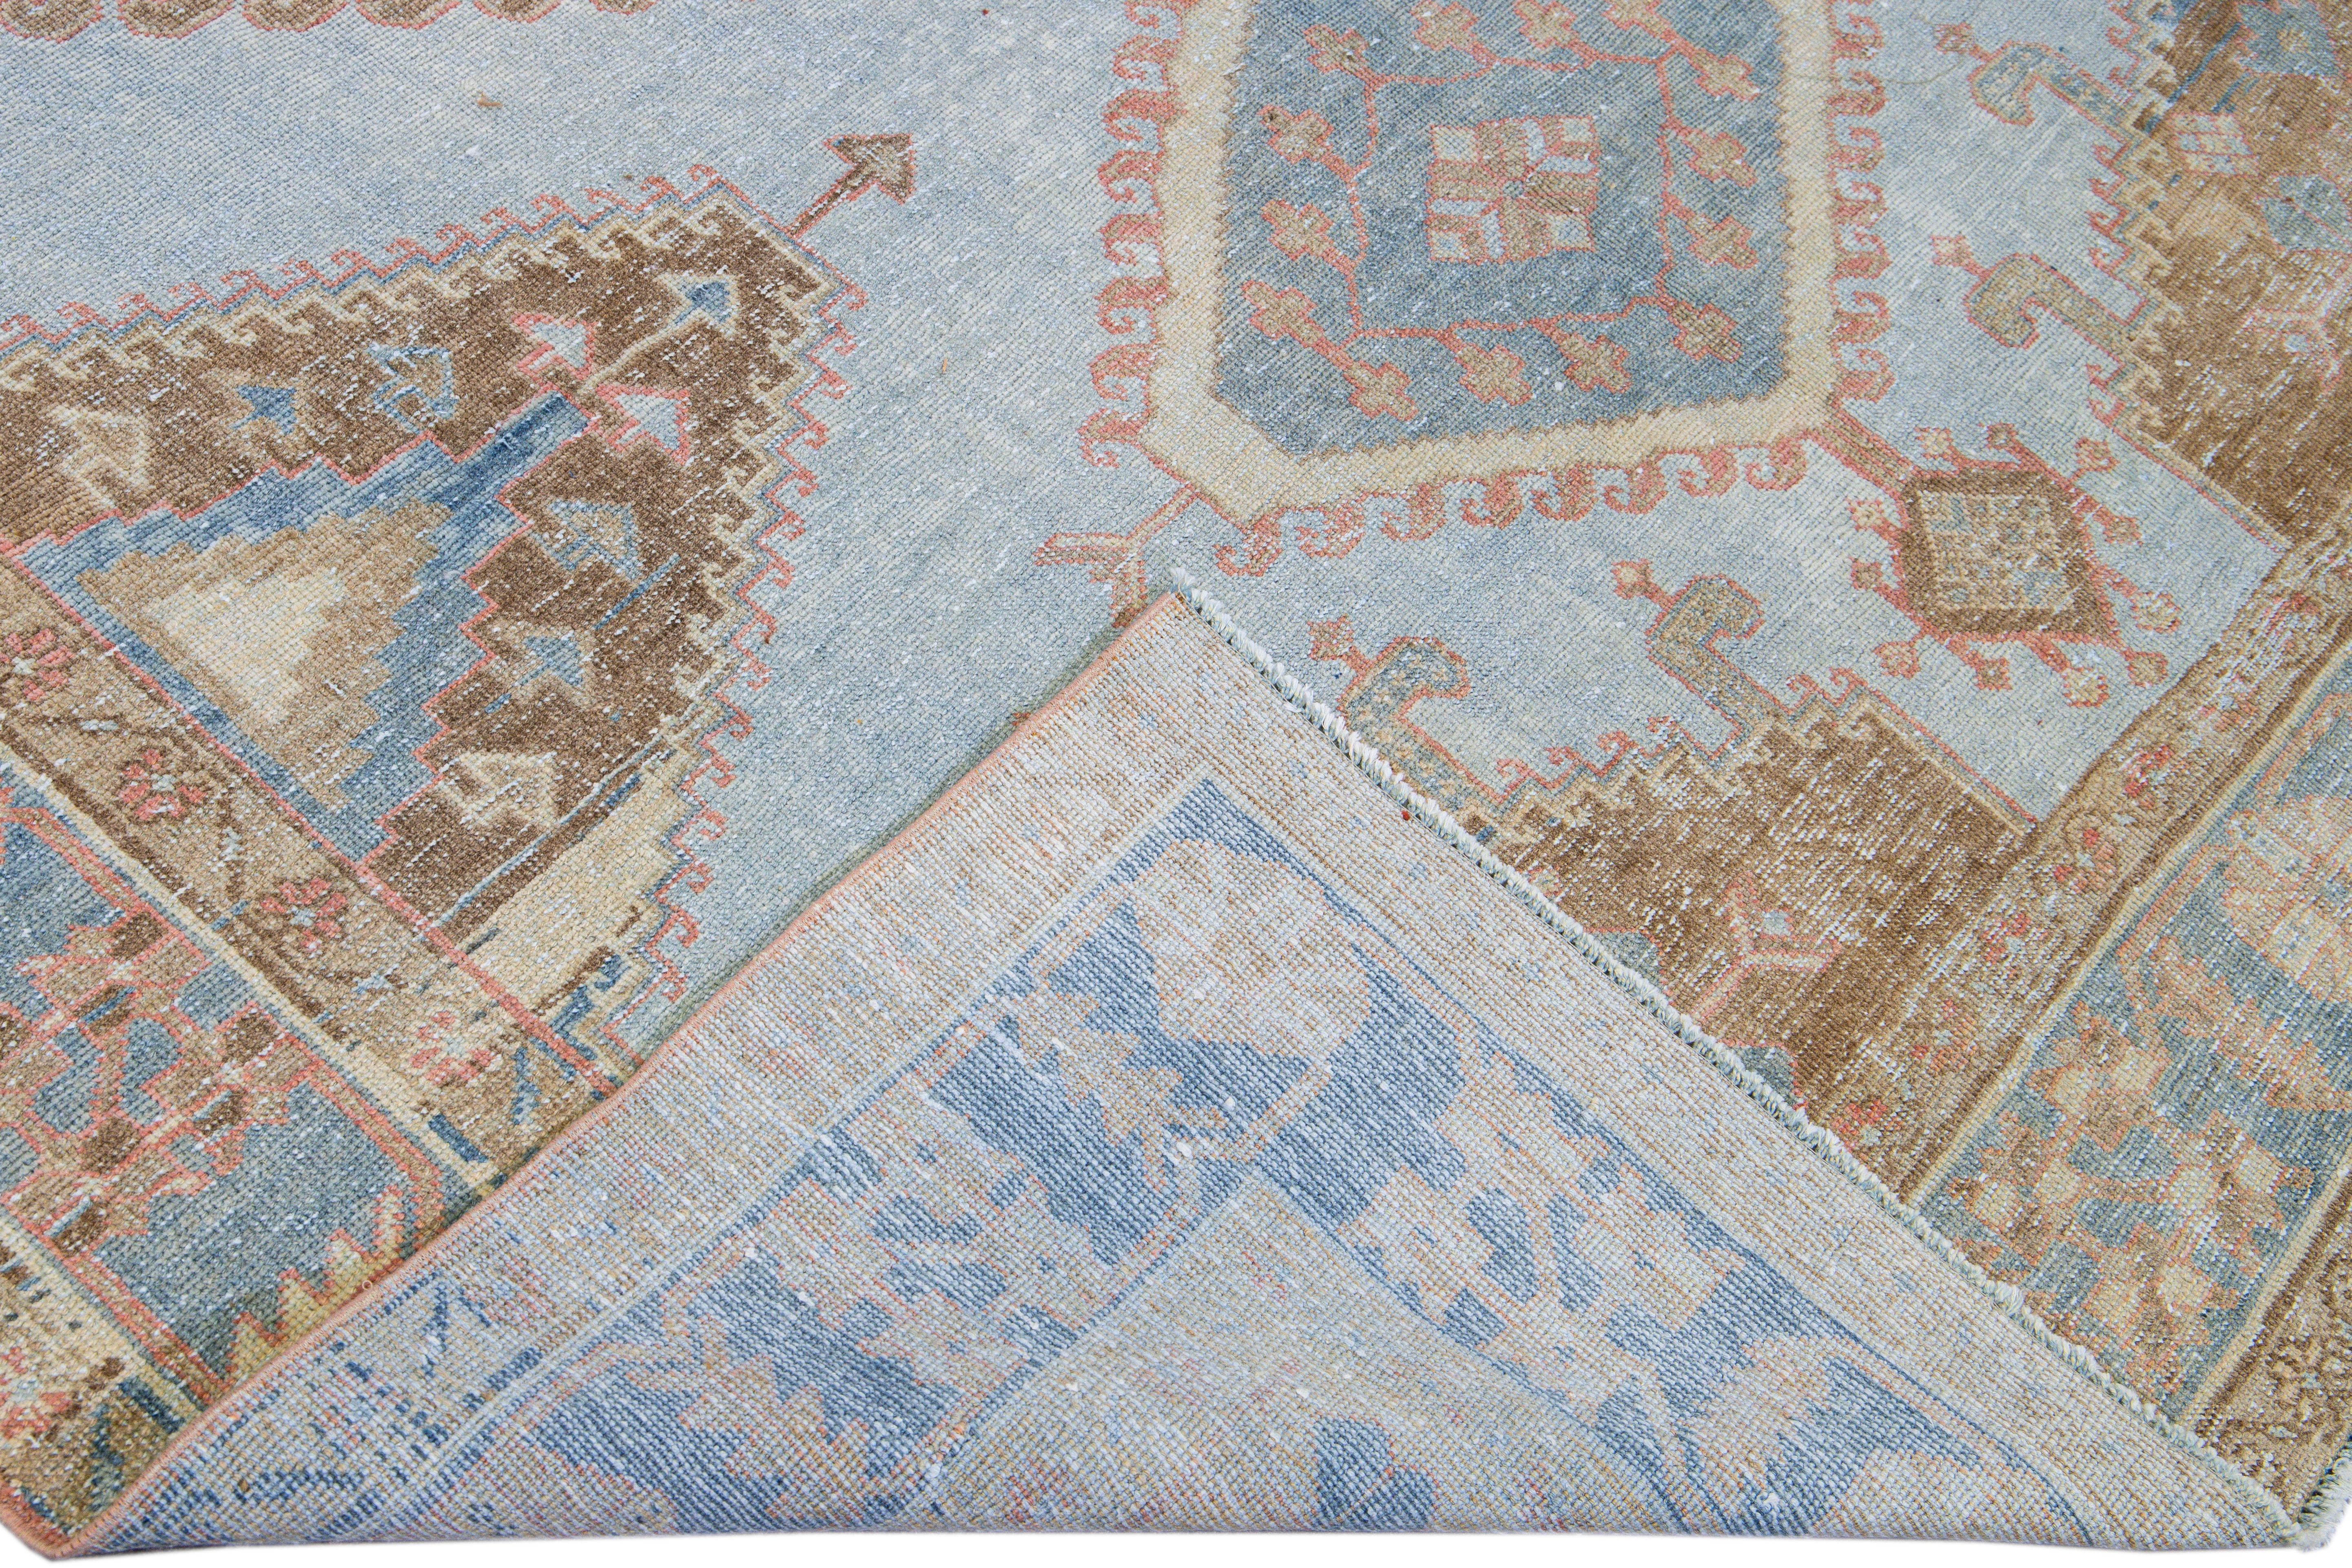 Beautiful vintage Malayer hand-knotted wool rug with a blue field. This Malayer rug has brown and red accents in an all-over gorgeous geometric medallion floral pattern design.

This rug measures: 7'1